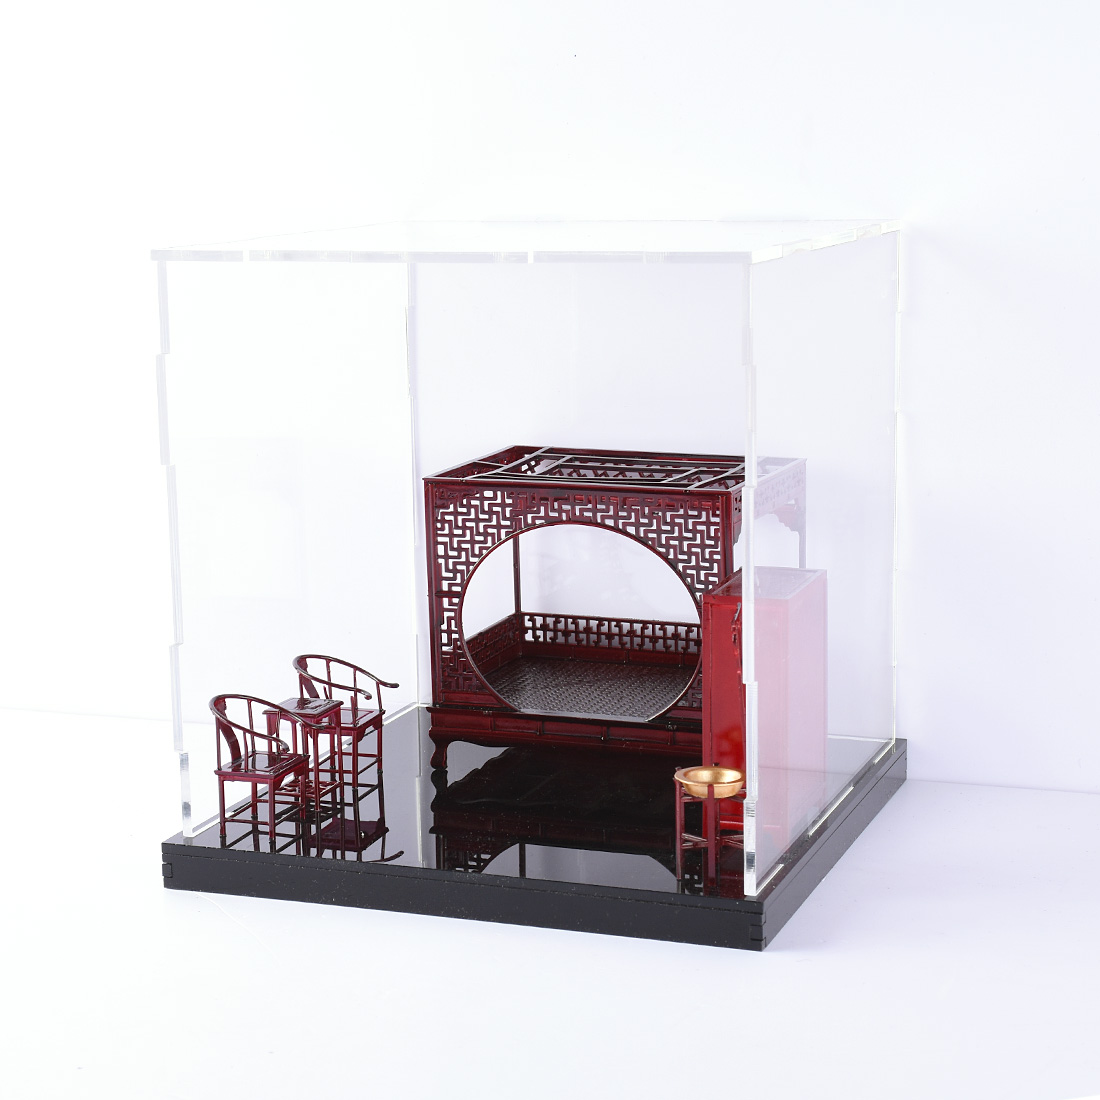 Crabkingdom-175165165mm-Chinese-Mahogany-Bedroom-Doll-House-DIY-Toy-Set-Collection-Gift-Display-Deco-1485796